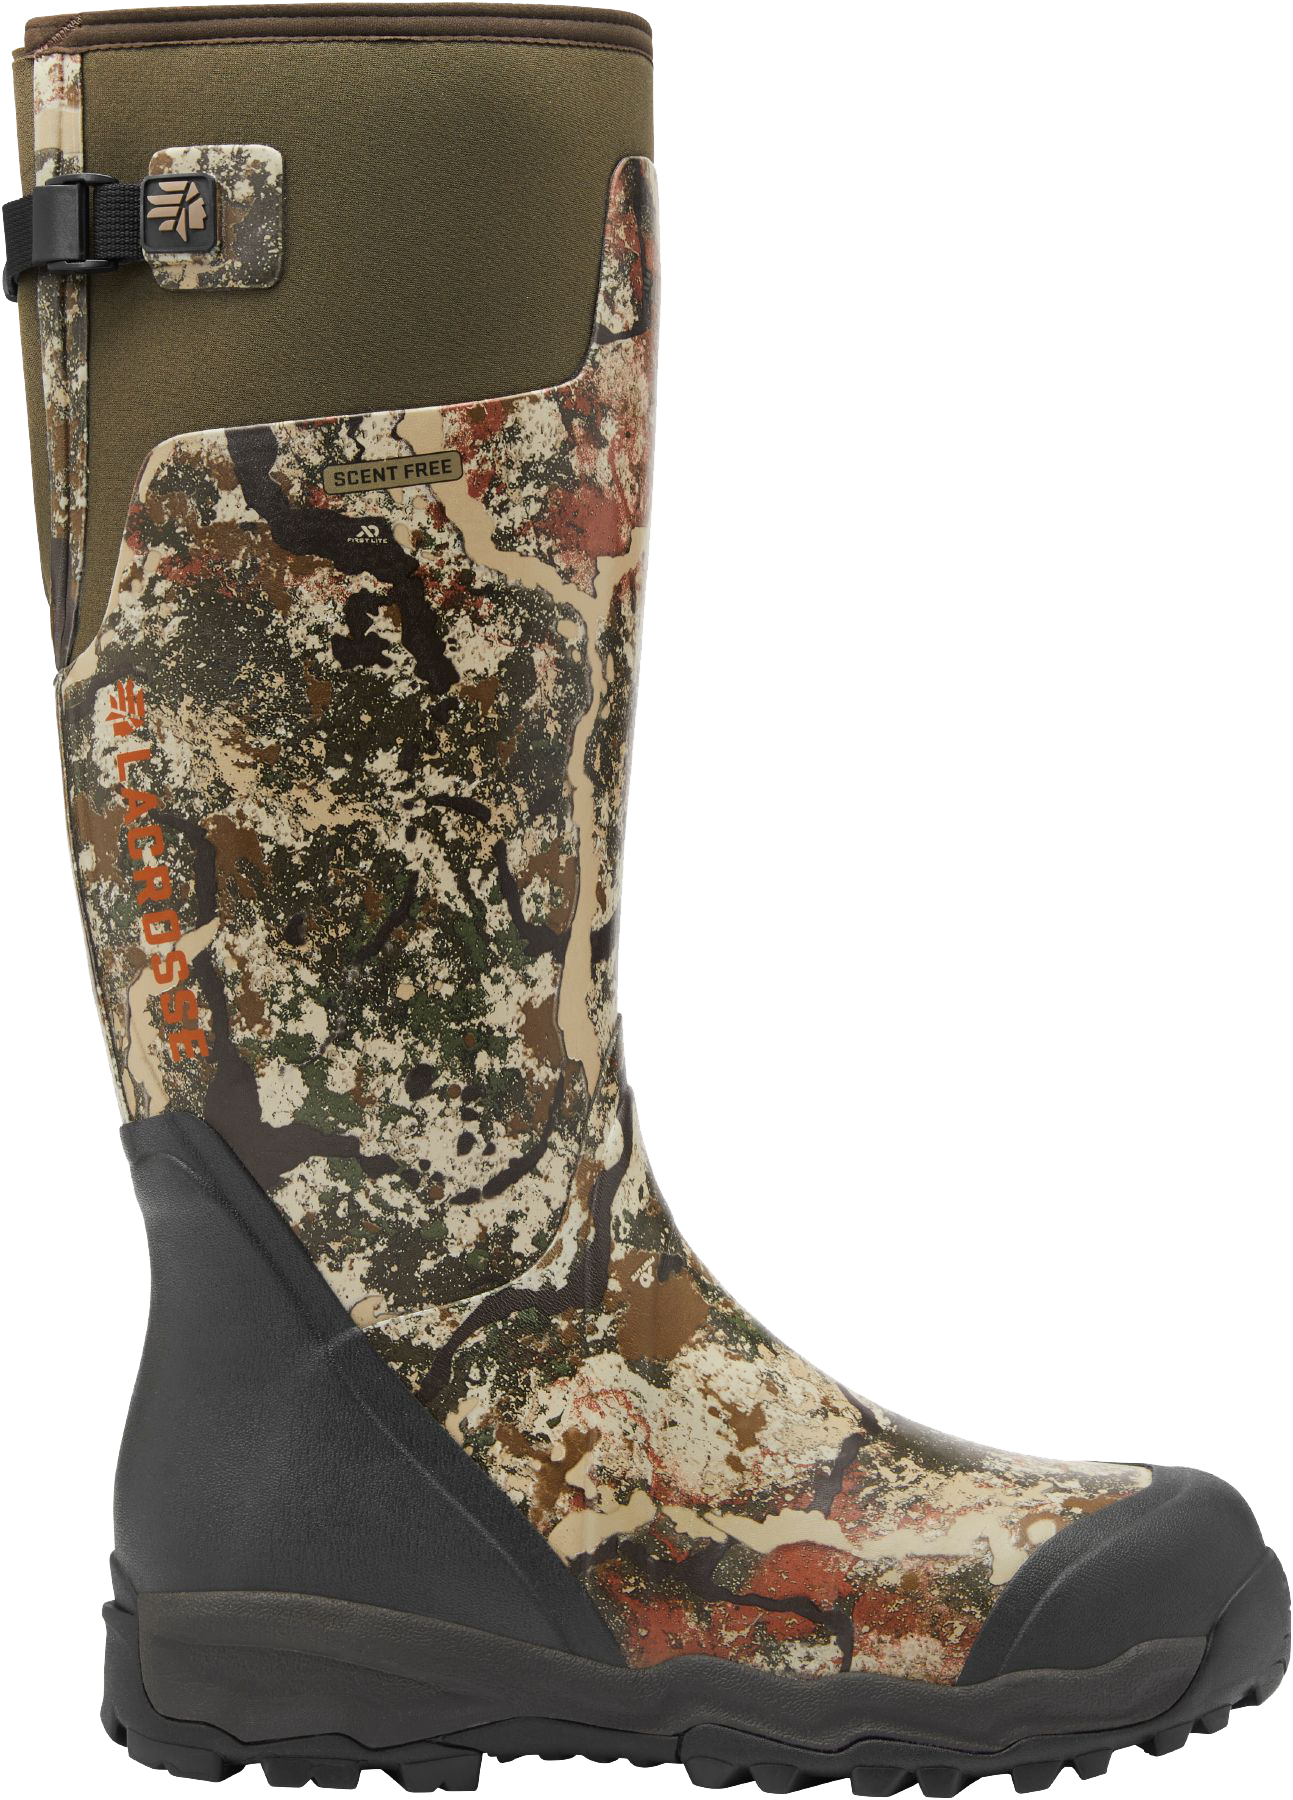 LaCrosse AlphaBurly Pro Hunting Boots for Men - First Lite Specter - 9M